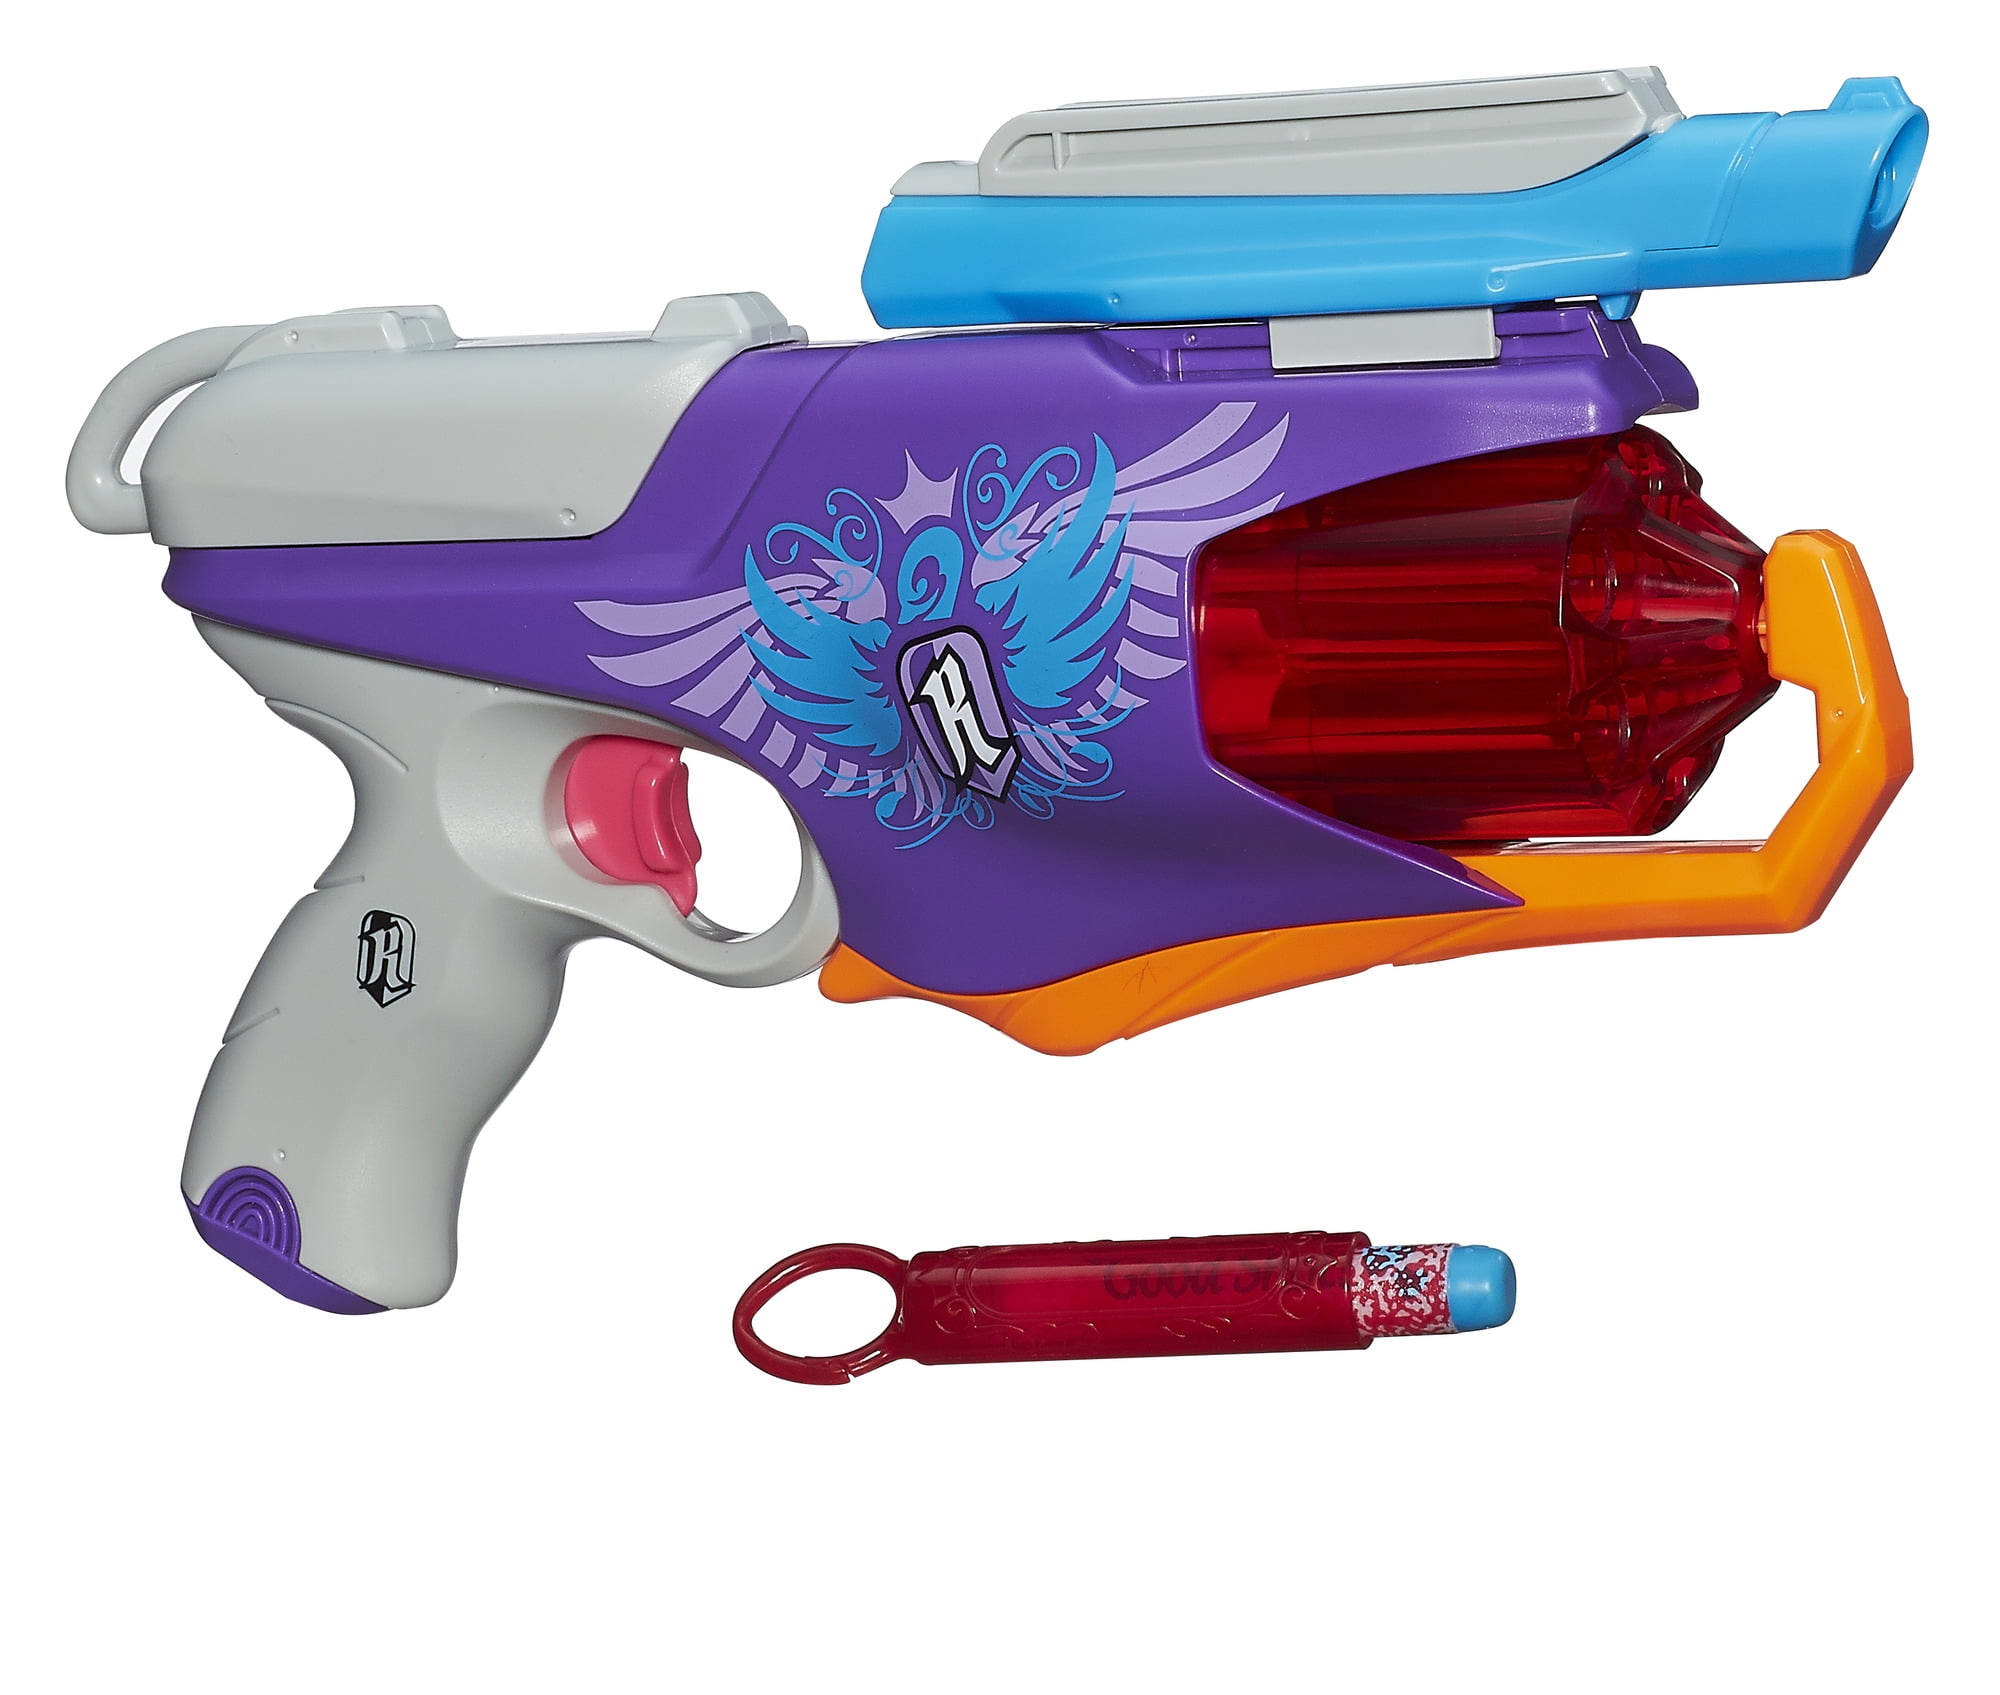 Nerf Rebelle Focus Fire Crossbow Blaster New Toy Ages 8 Girls Boys Play Gift 